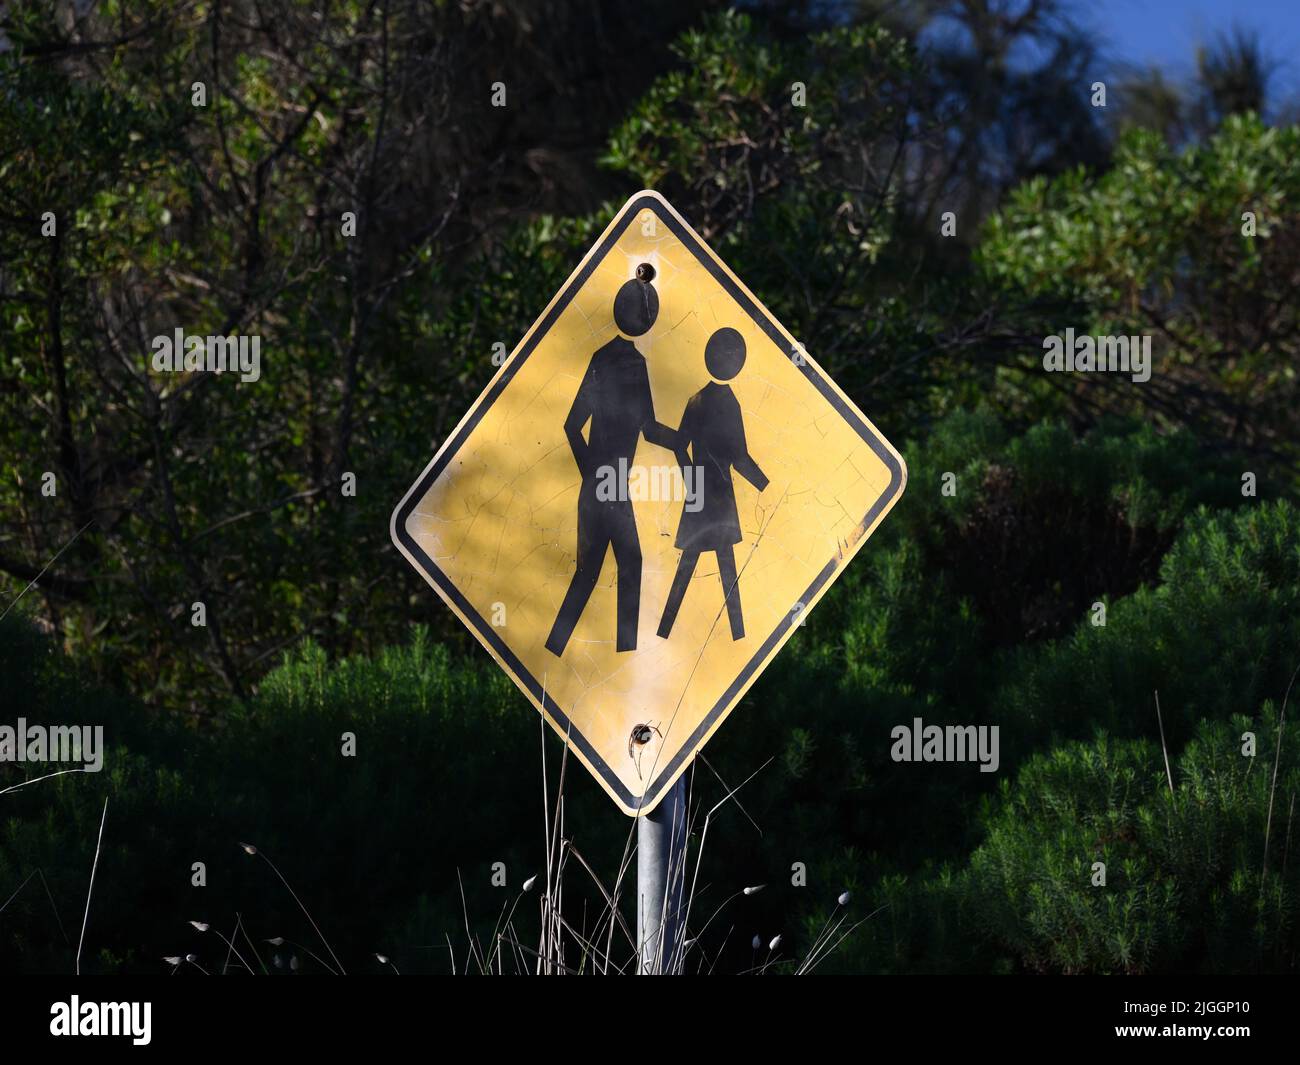 Cracked and faded, yellow and black, pedestrian crossing sign, partially obscured by overgrown vegetation Stock Photo